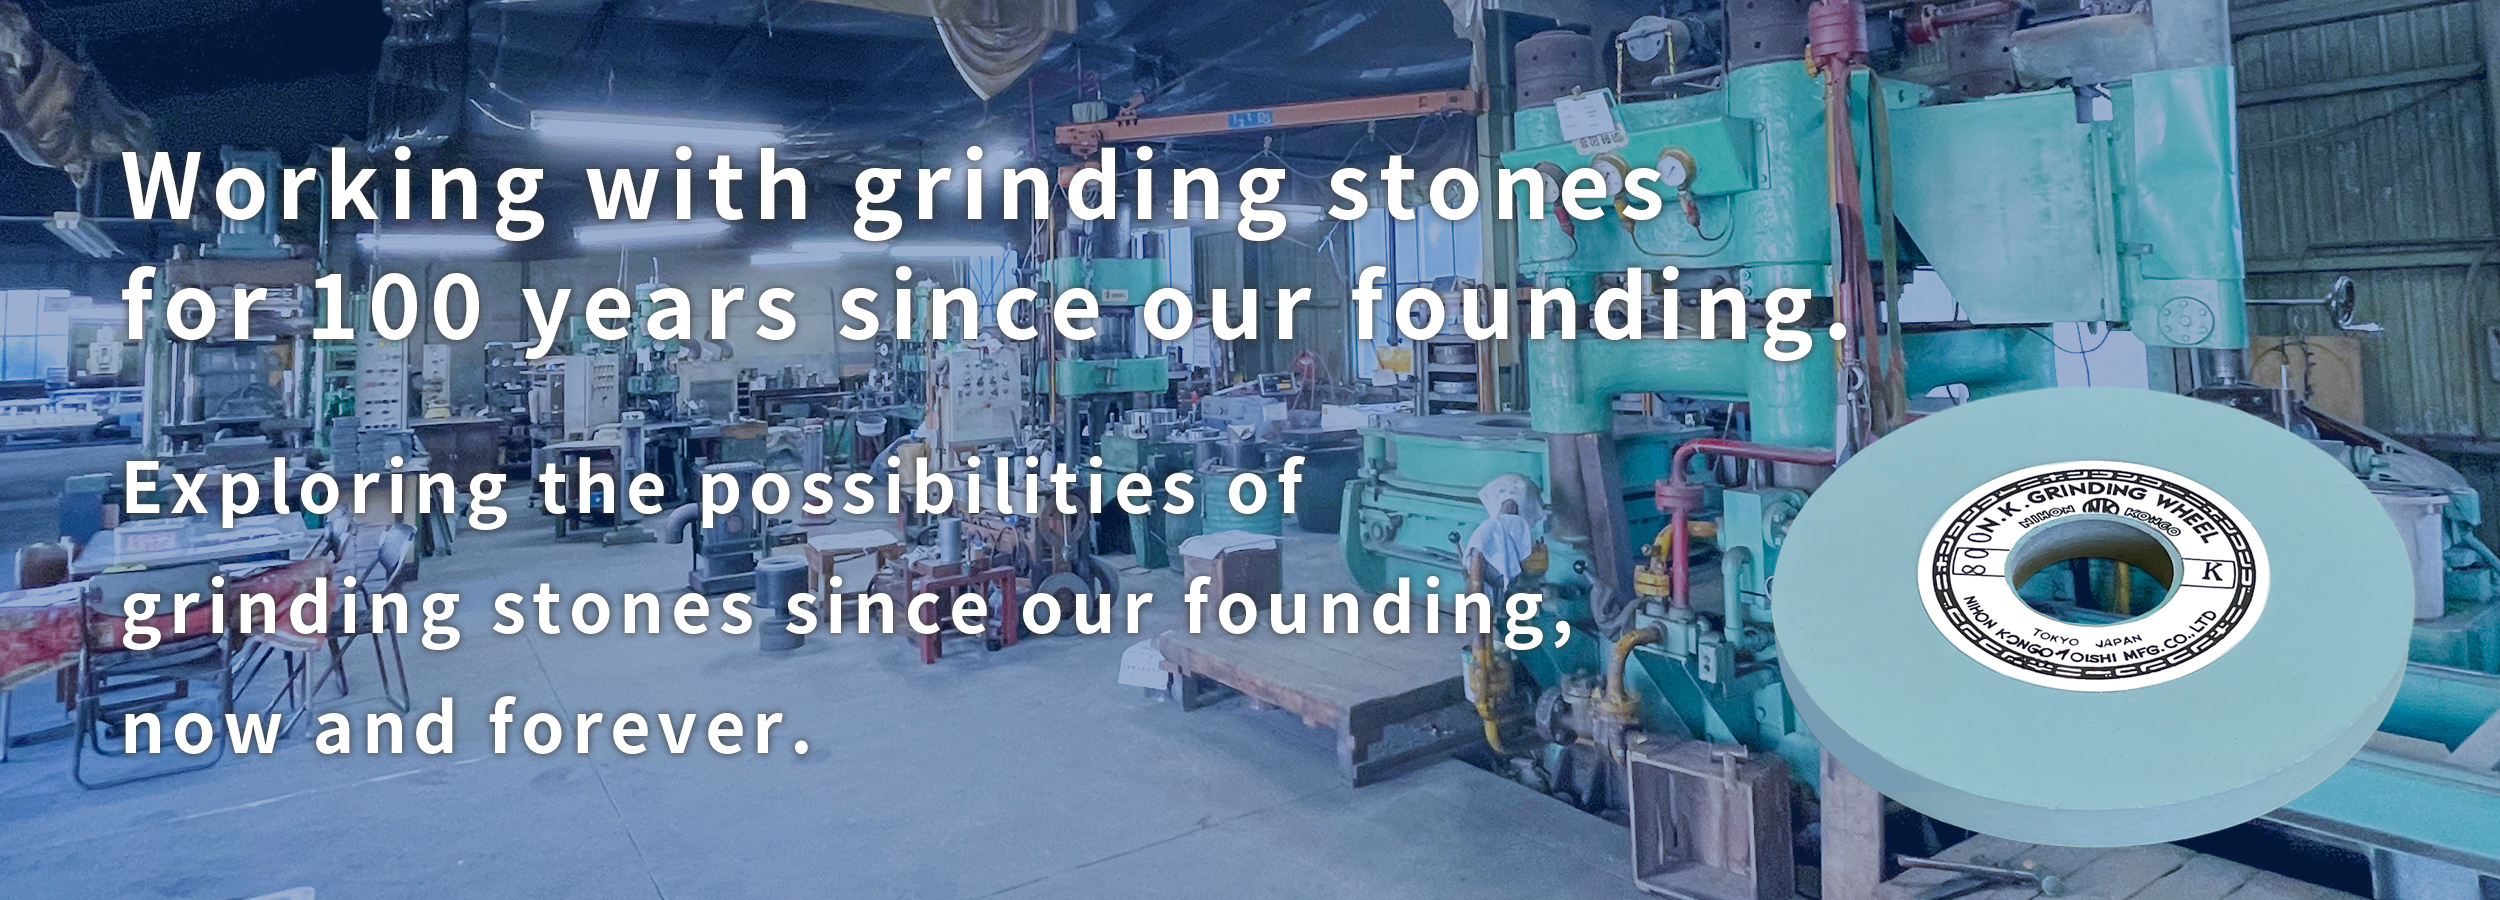 Working with grinding stones for 100 years since our founding